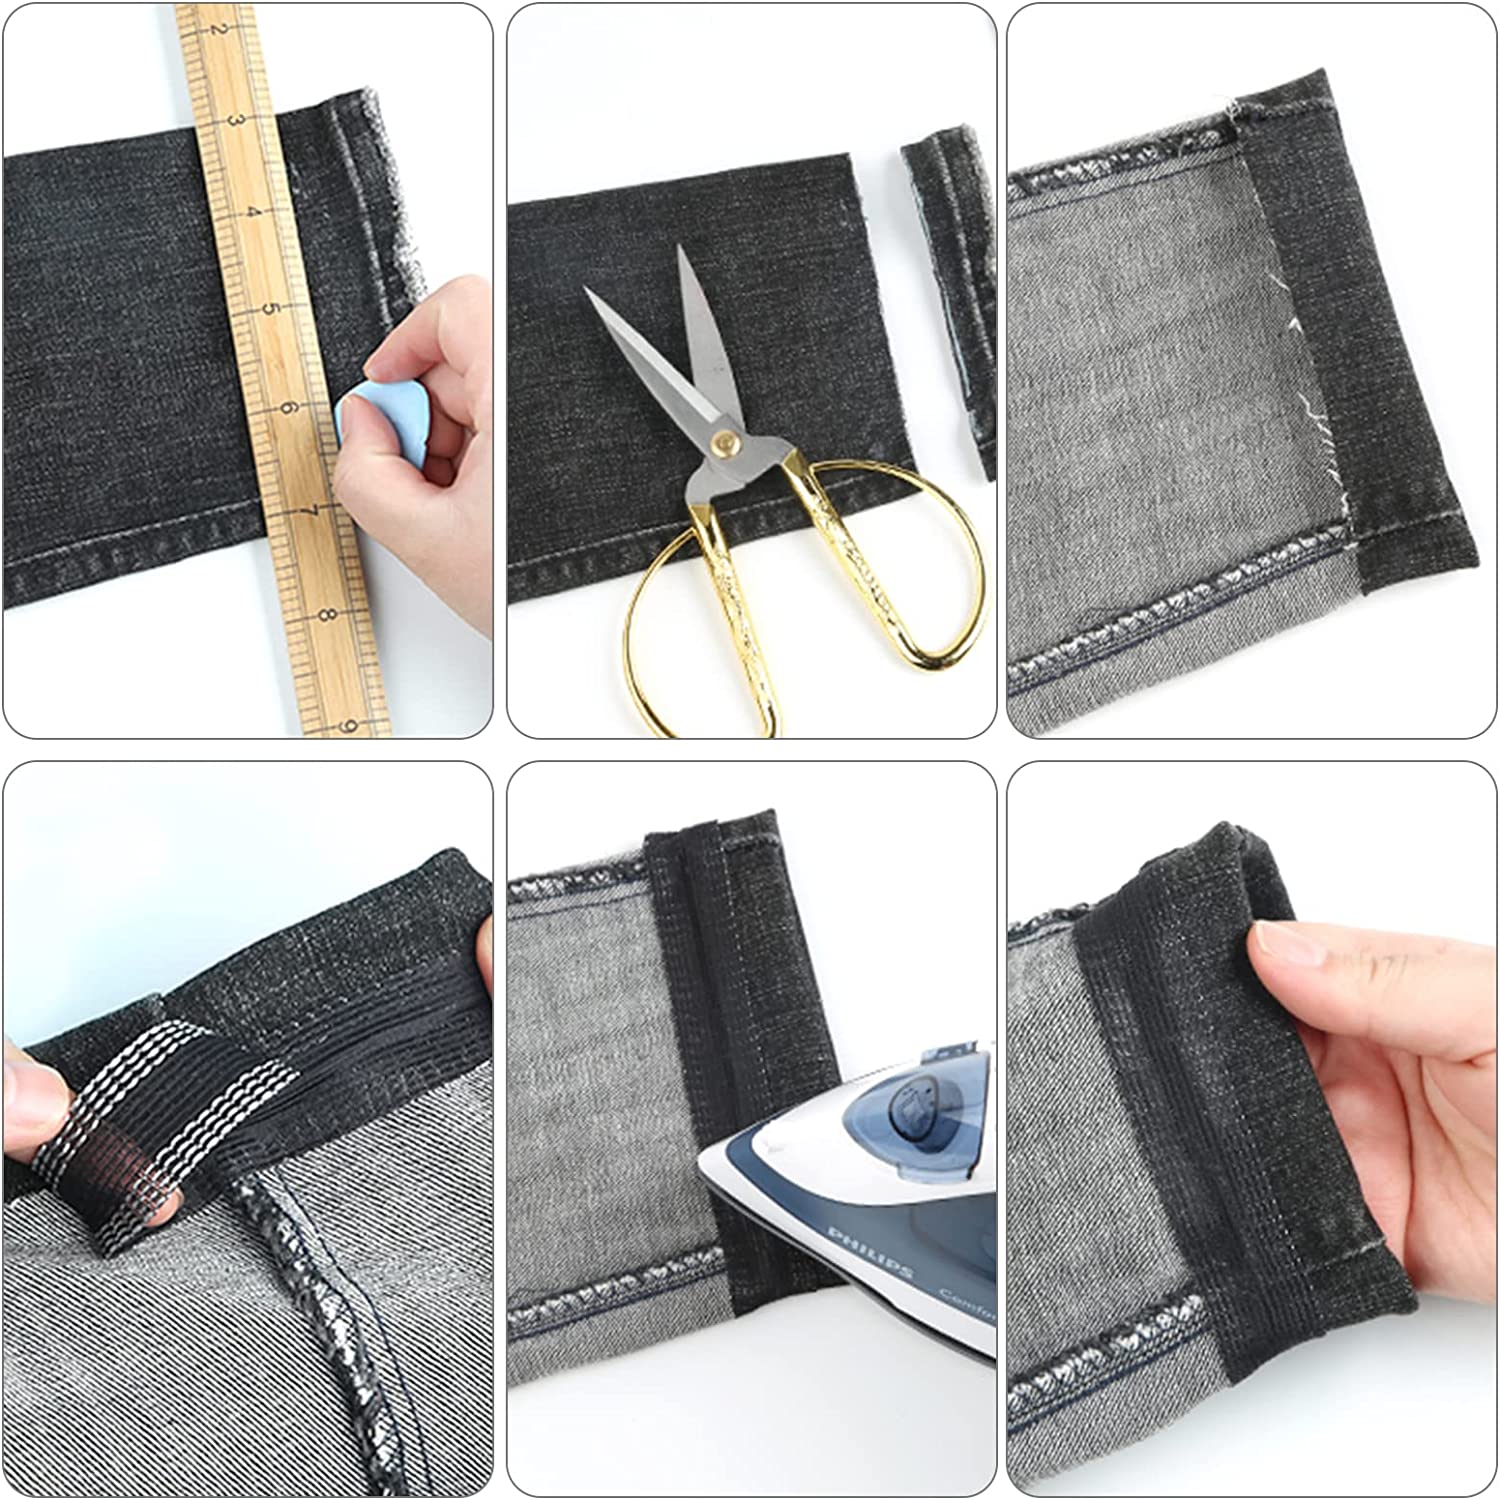  KINBOM 2 Rolls 140 Yards Iron On Hem Tape, No Sew Hemming Tape  for Pants, Widened Iron-On Fabric Fusing Tape for Hemming Broken Curtains  Clothes Jeans Skirt（Black 2cm/0.8inch, White 2.5cm/1 inch） 